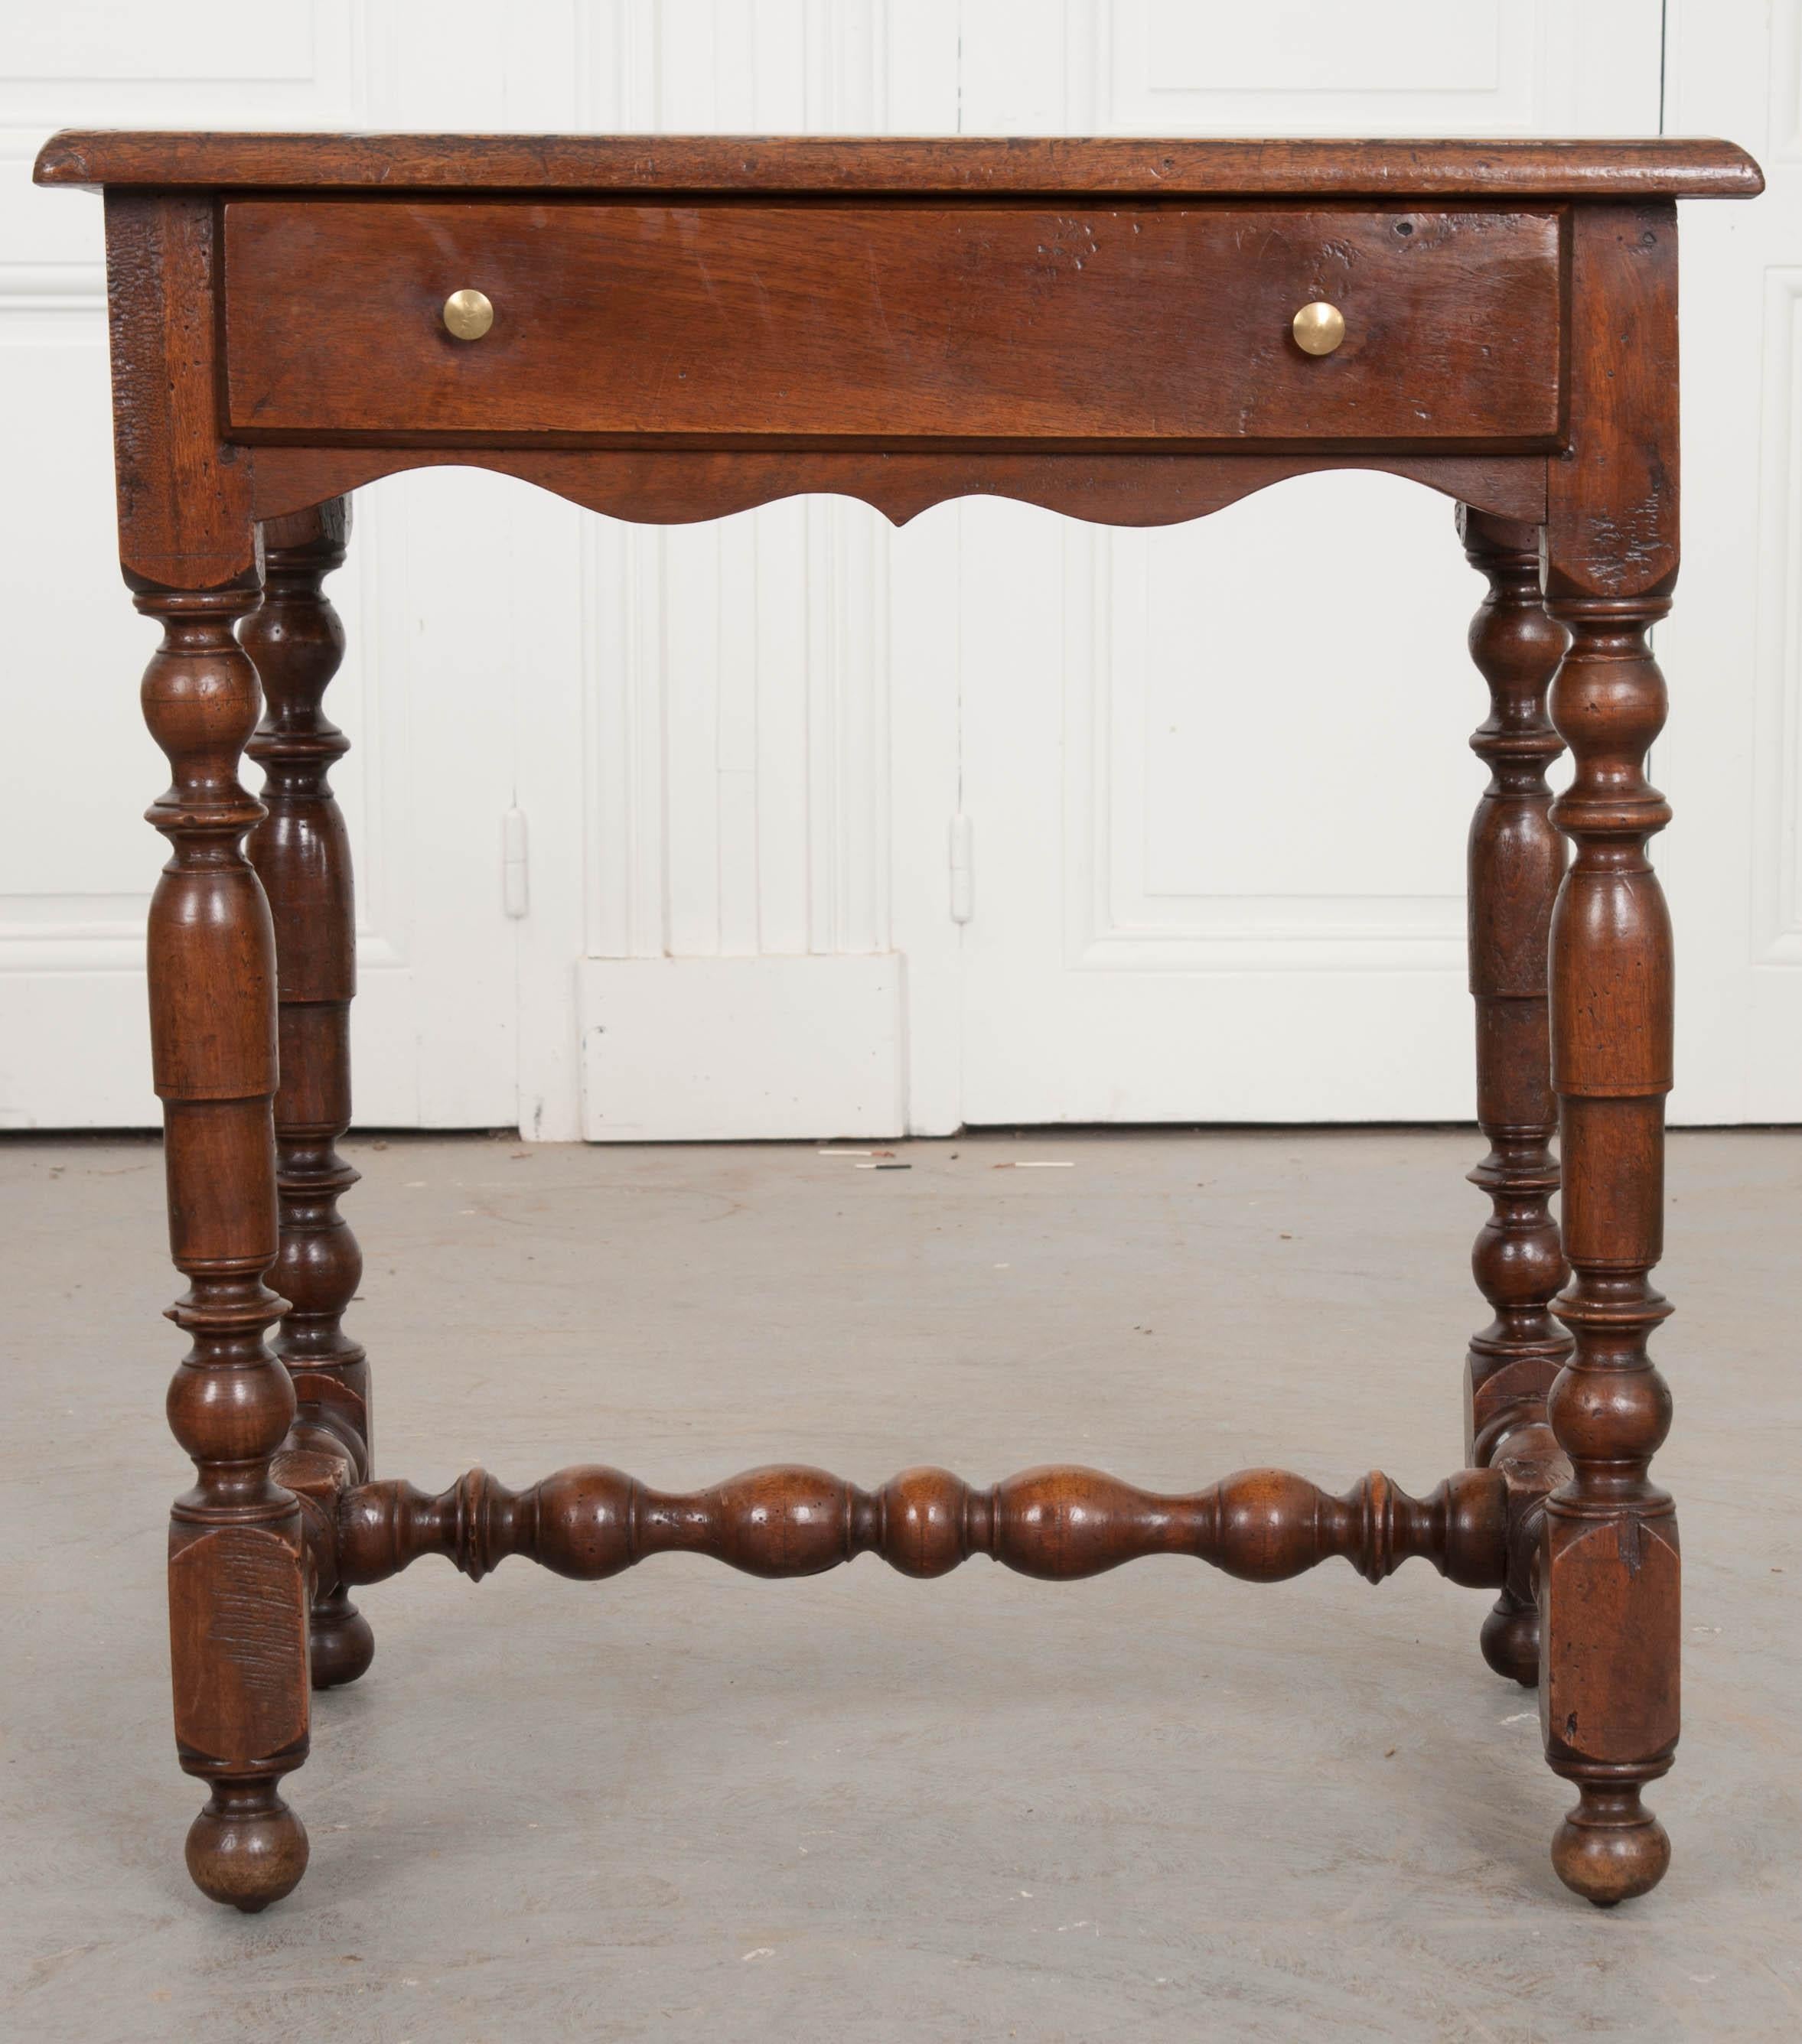 A fantastic solid-walnut table with drawer, dating to 1780s England. This small table would make a lovely drink or side table and also boasts storage. A wide drawer can be found in the table’s apron that will facilitate out-of-sight storage. It is